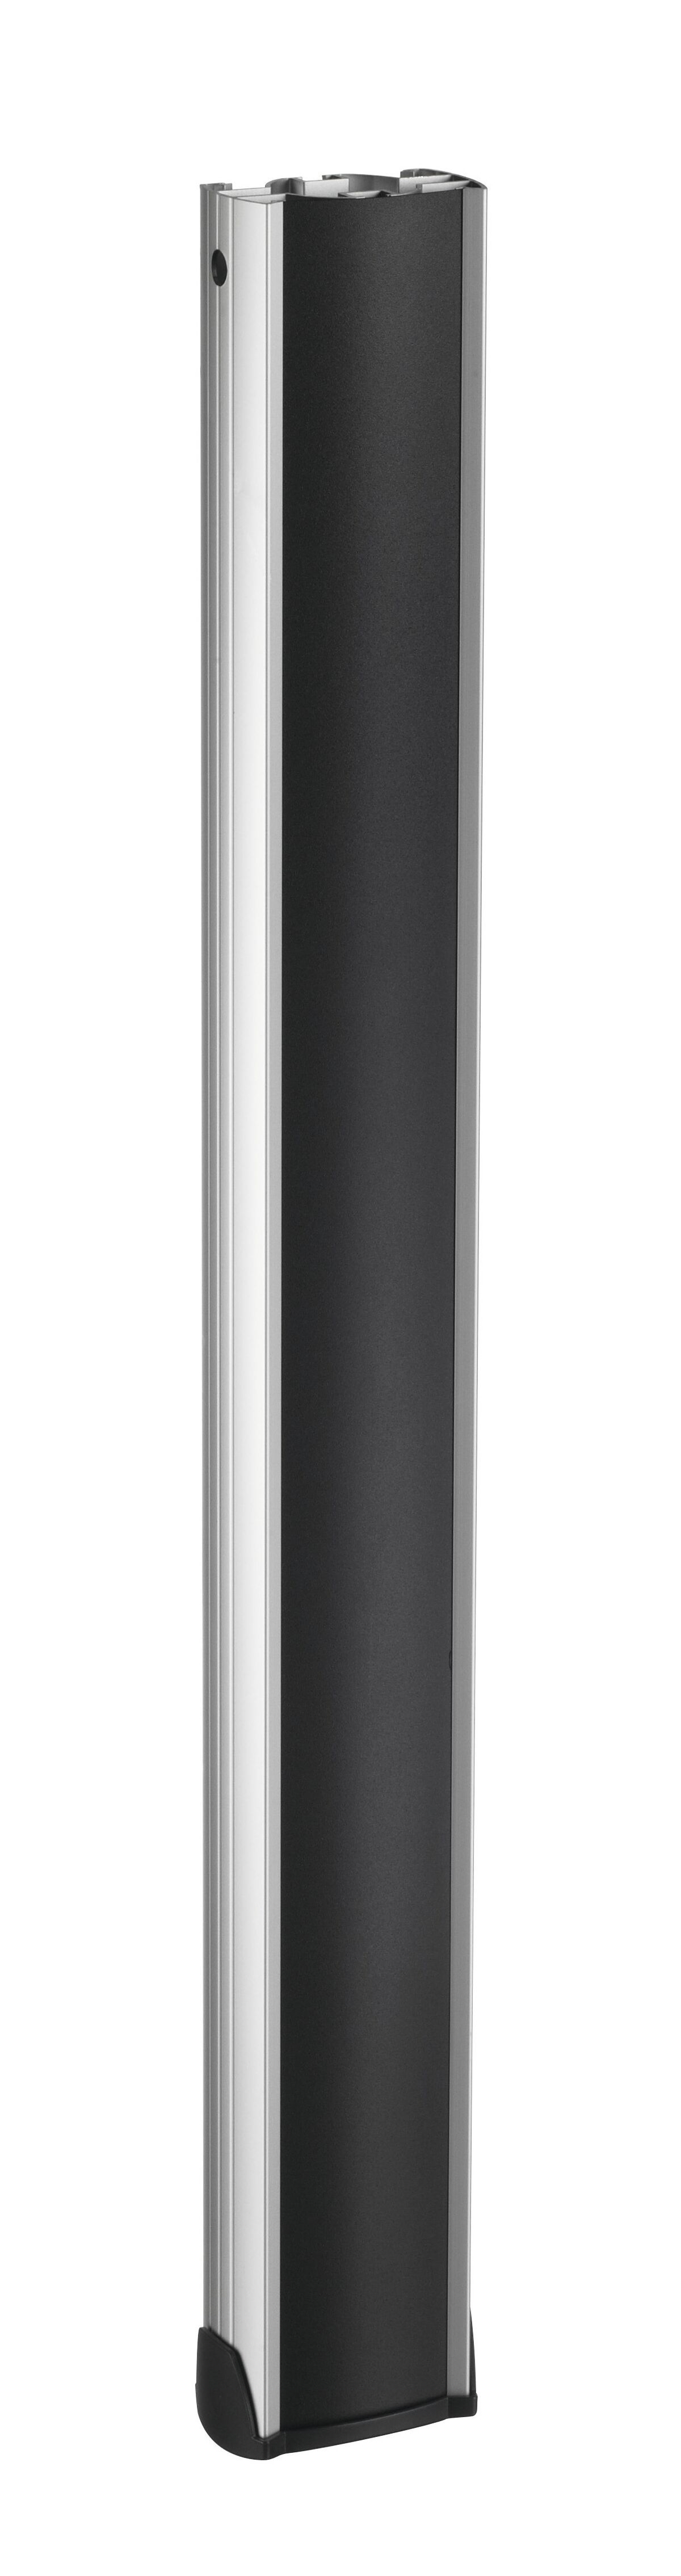 Vogel's PUC 2508 Tube 80 cm, silver - Product